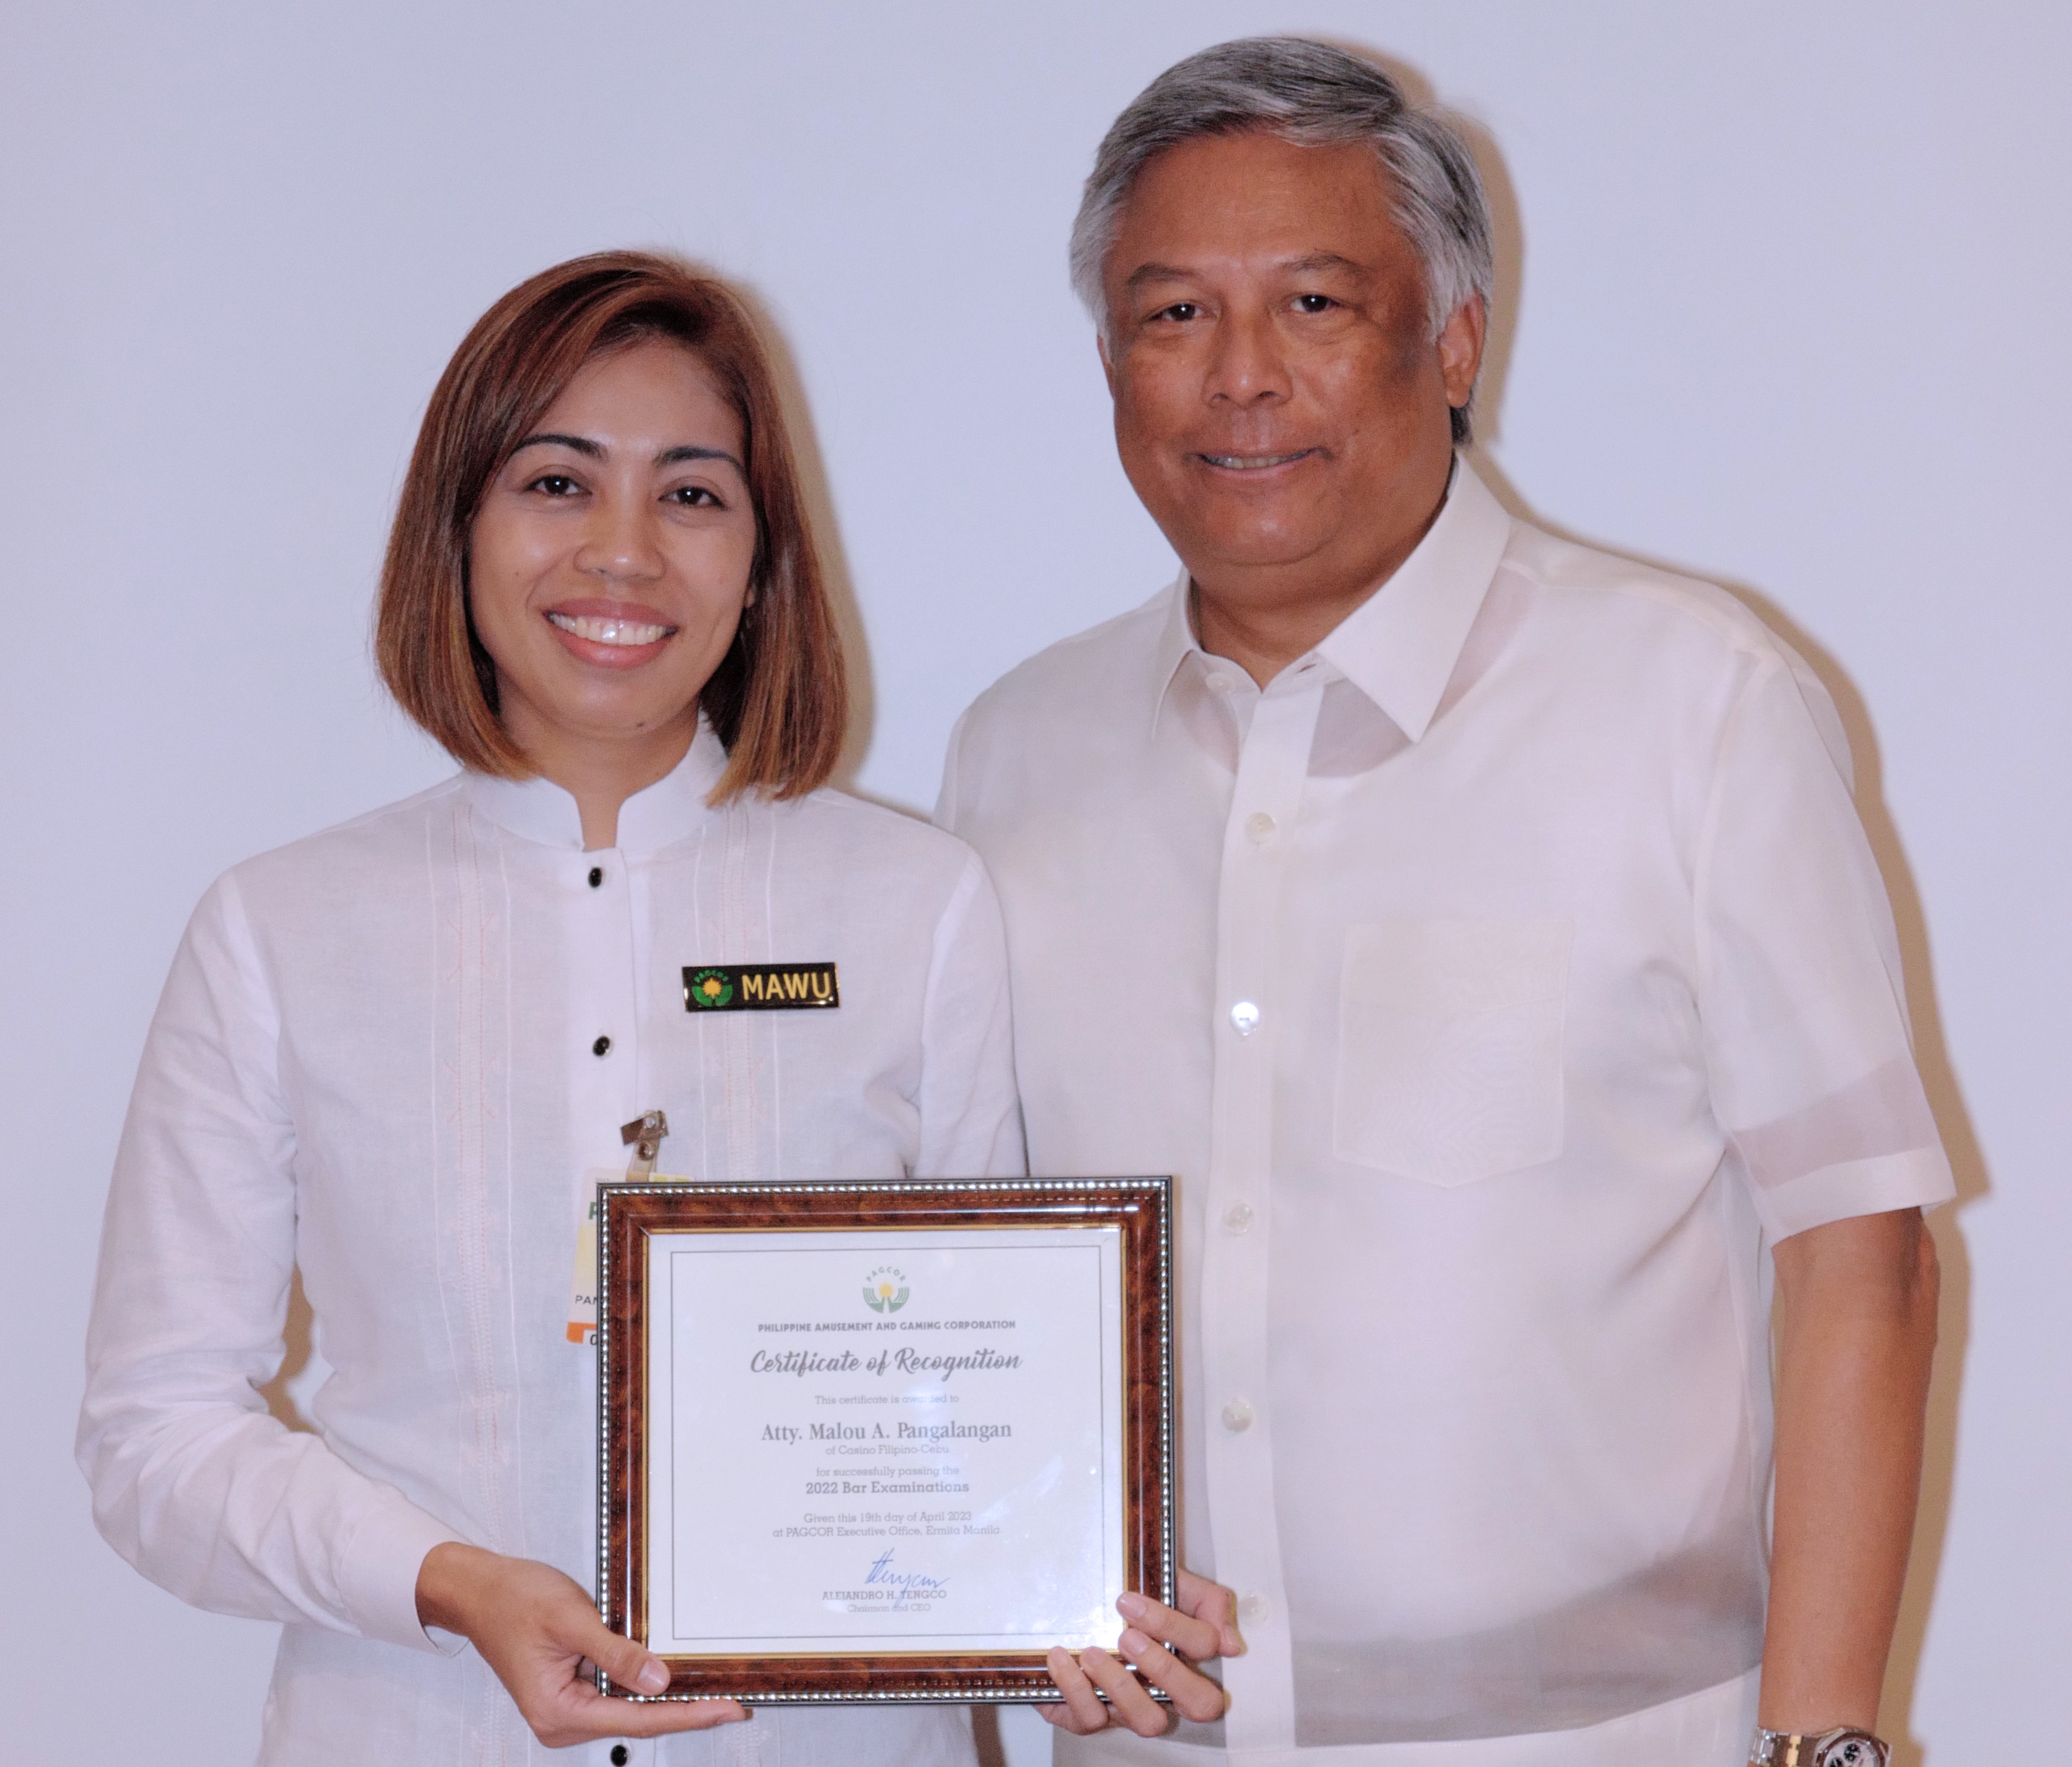 PAGCOR and AGENSBO365 employee who passed bar exam shares difficult law school journey